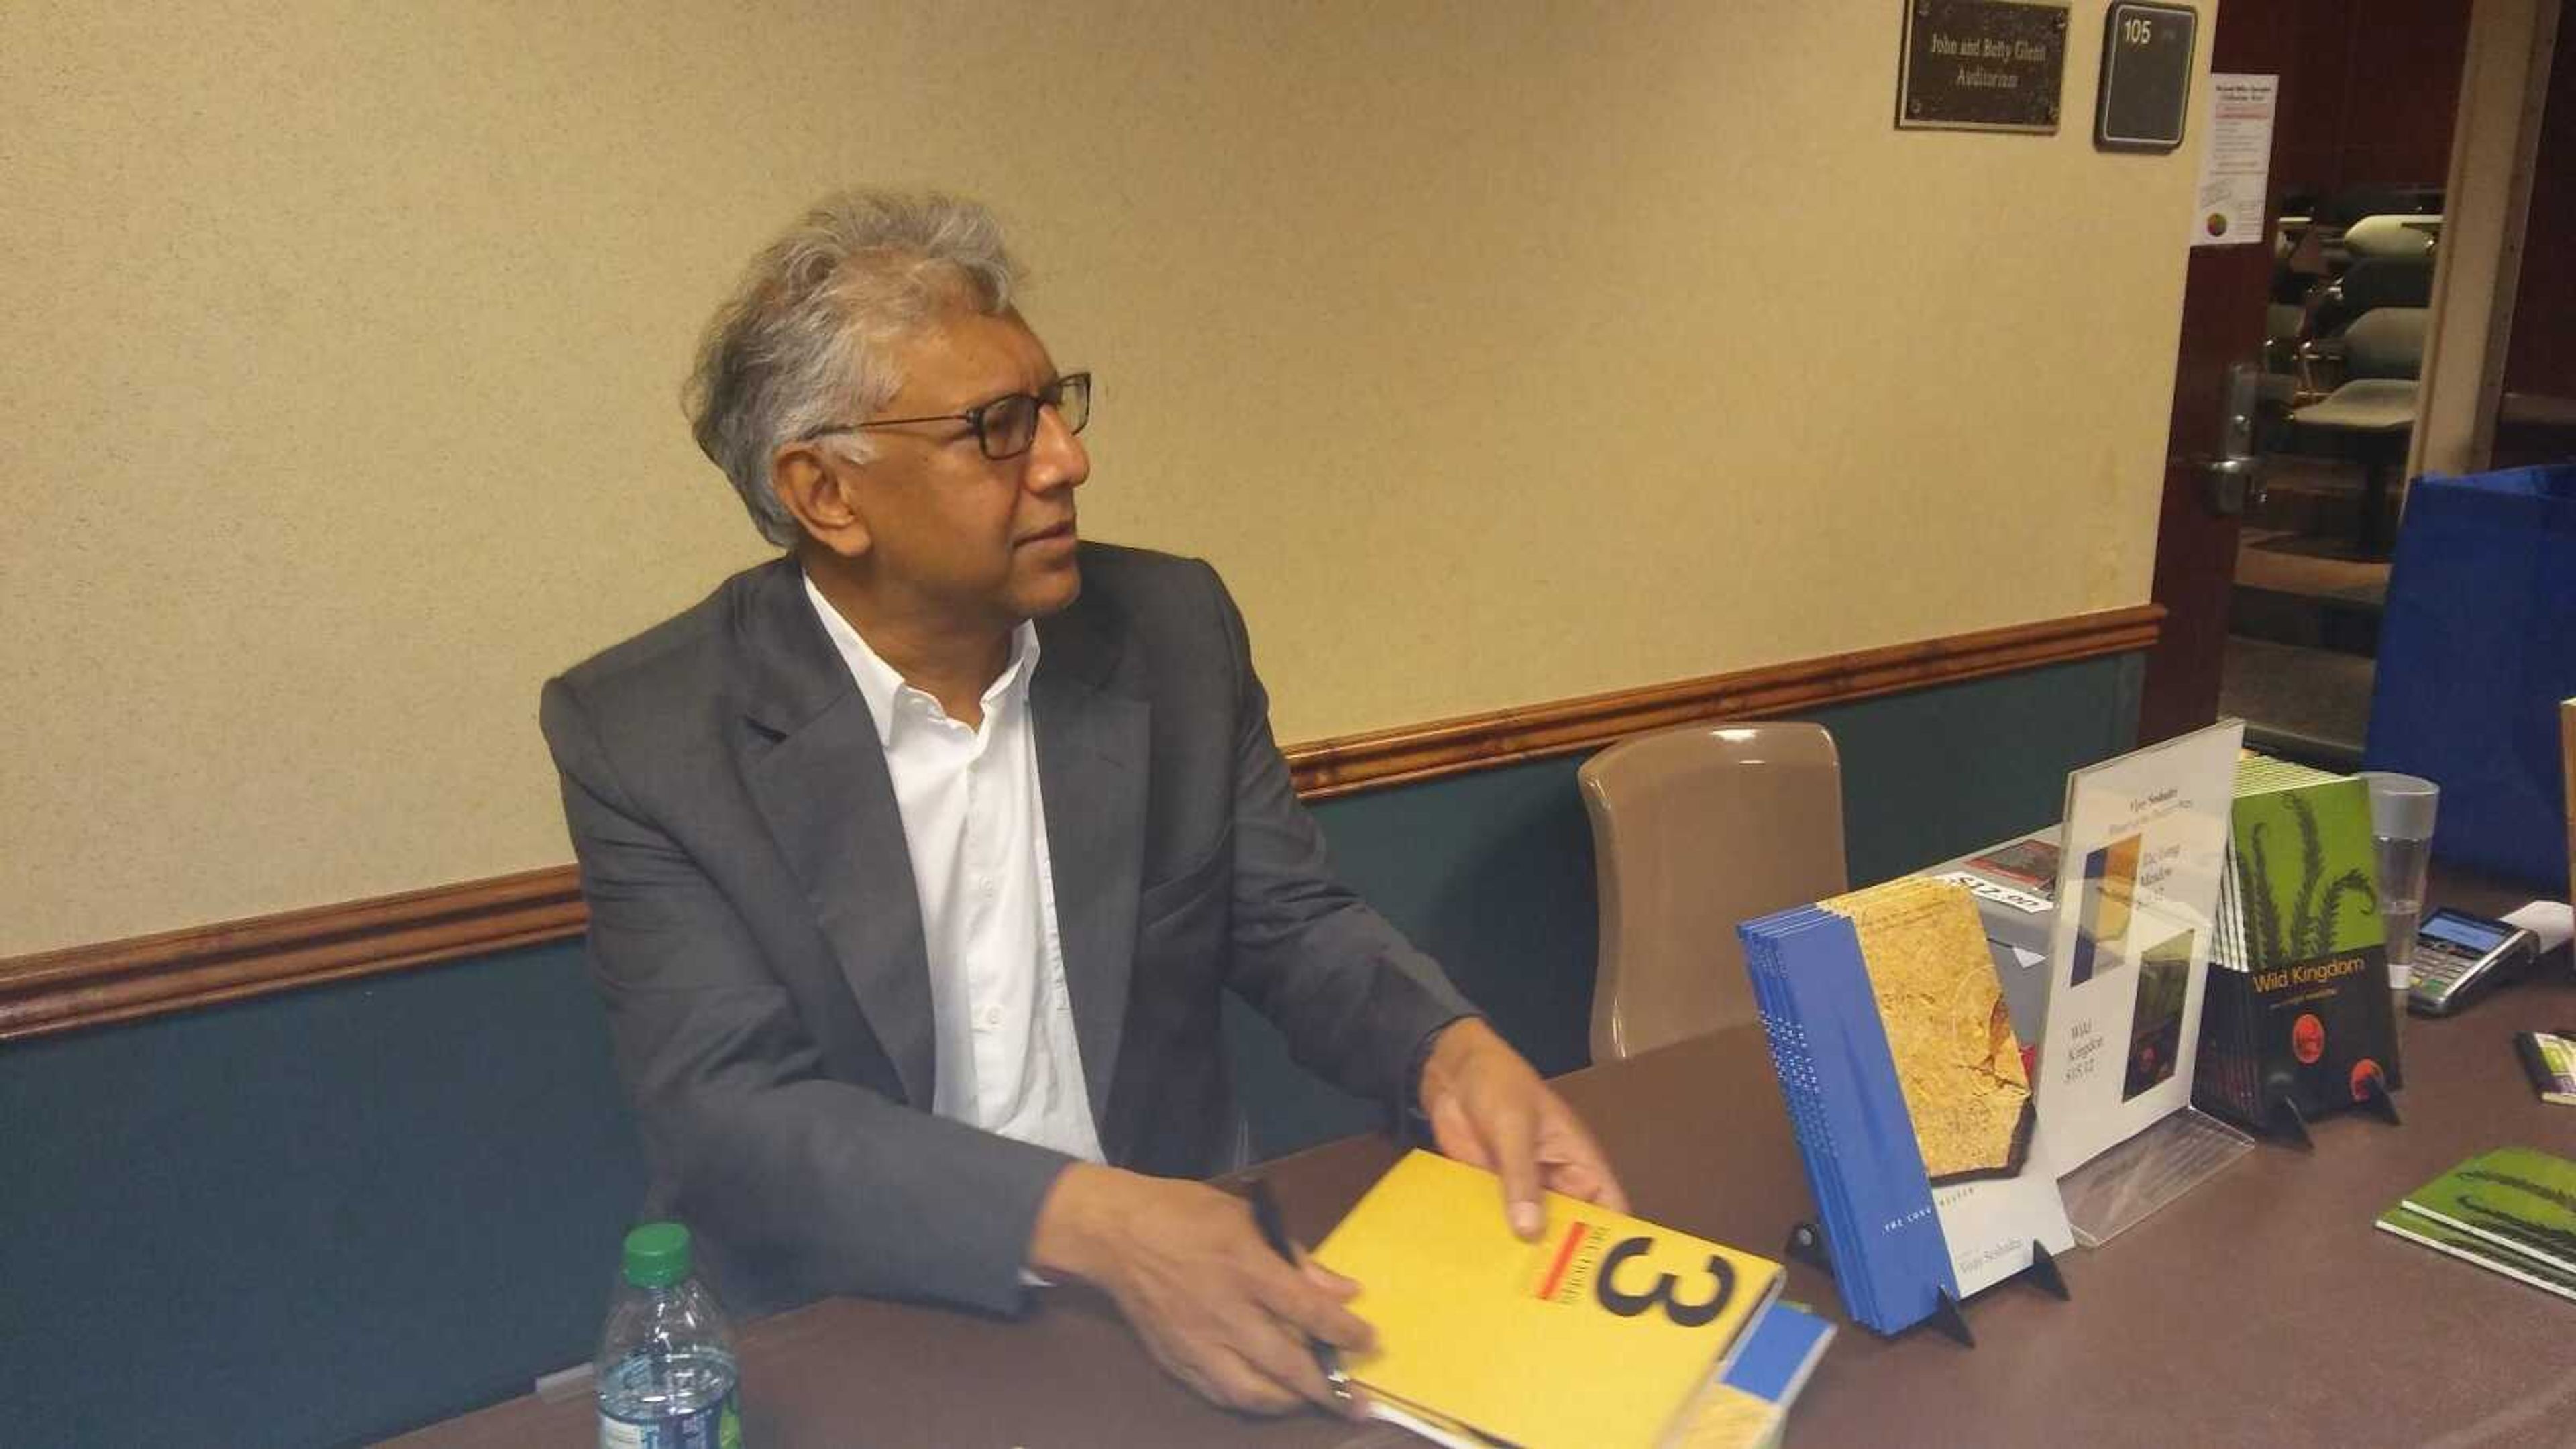 Vijay Seshardi, a Pulitzer Prize-winning poet, signs copies of his books for students who came to see him speak on Sept. 29.